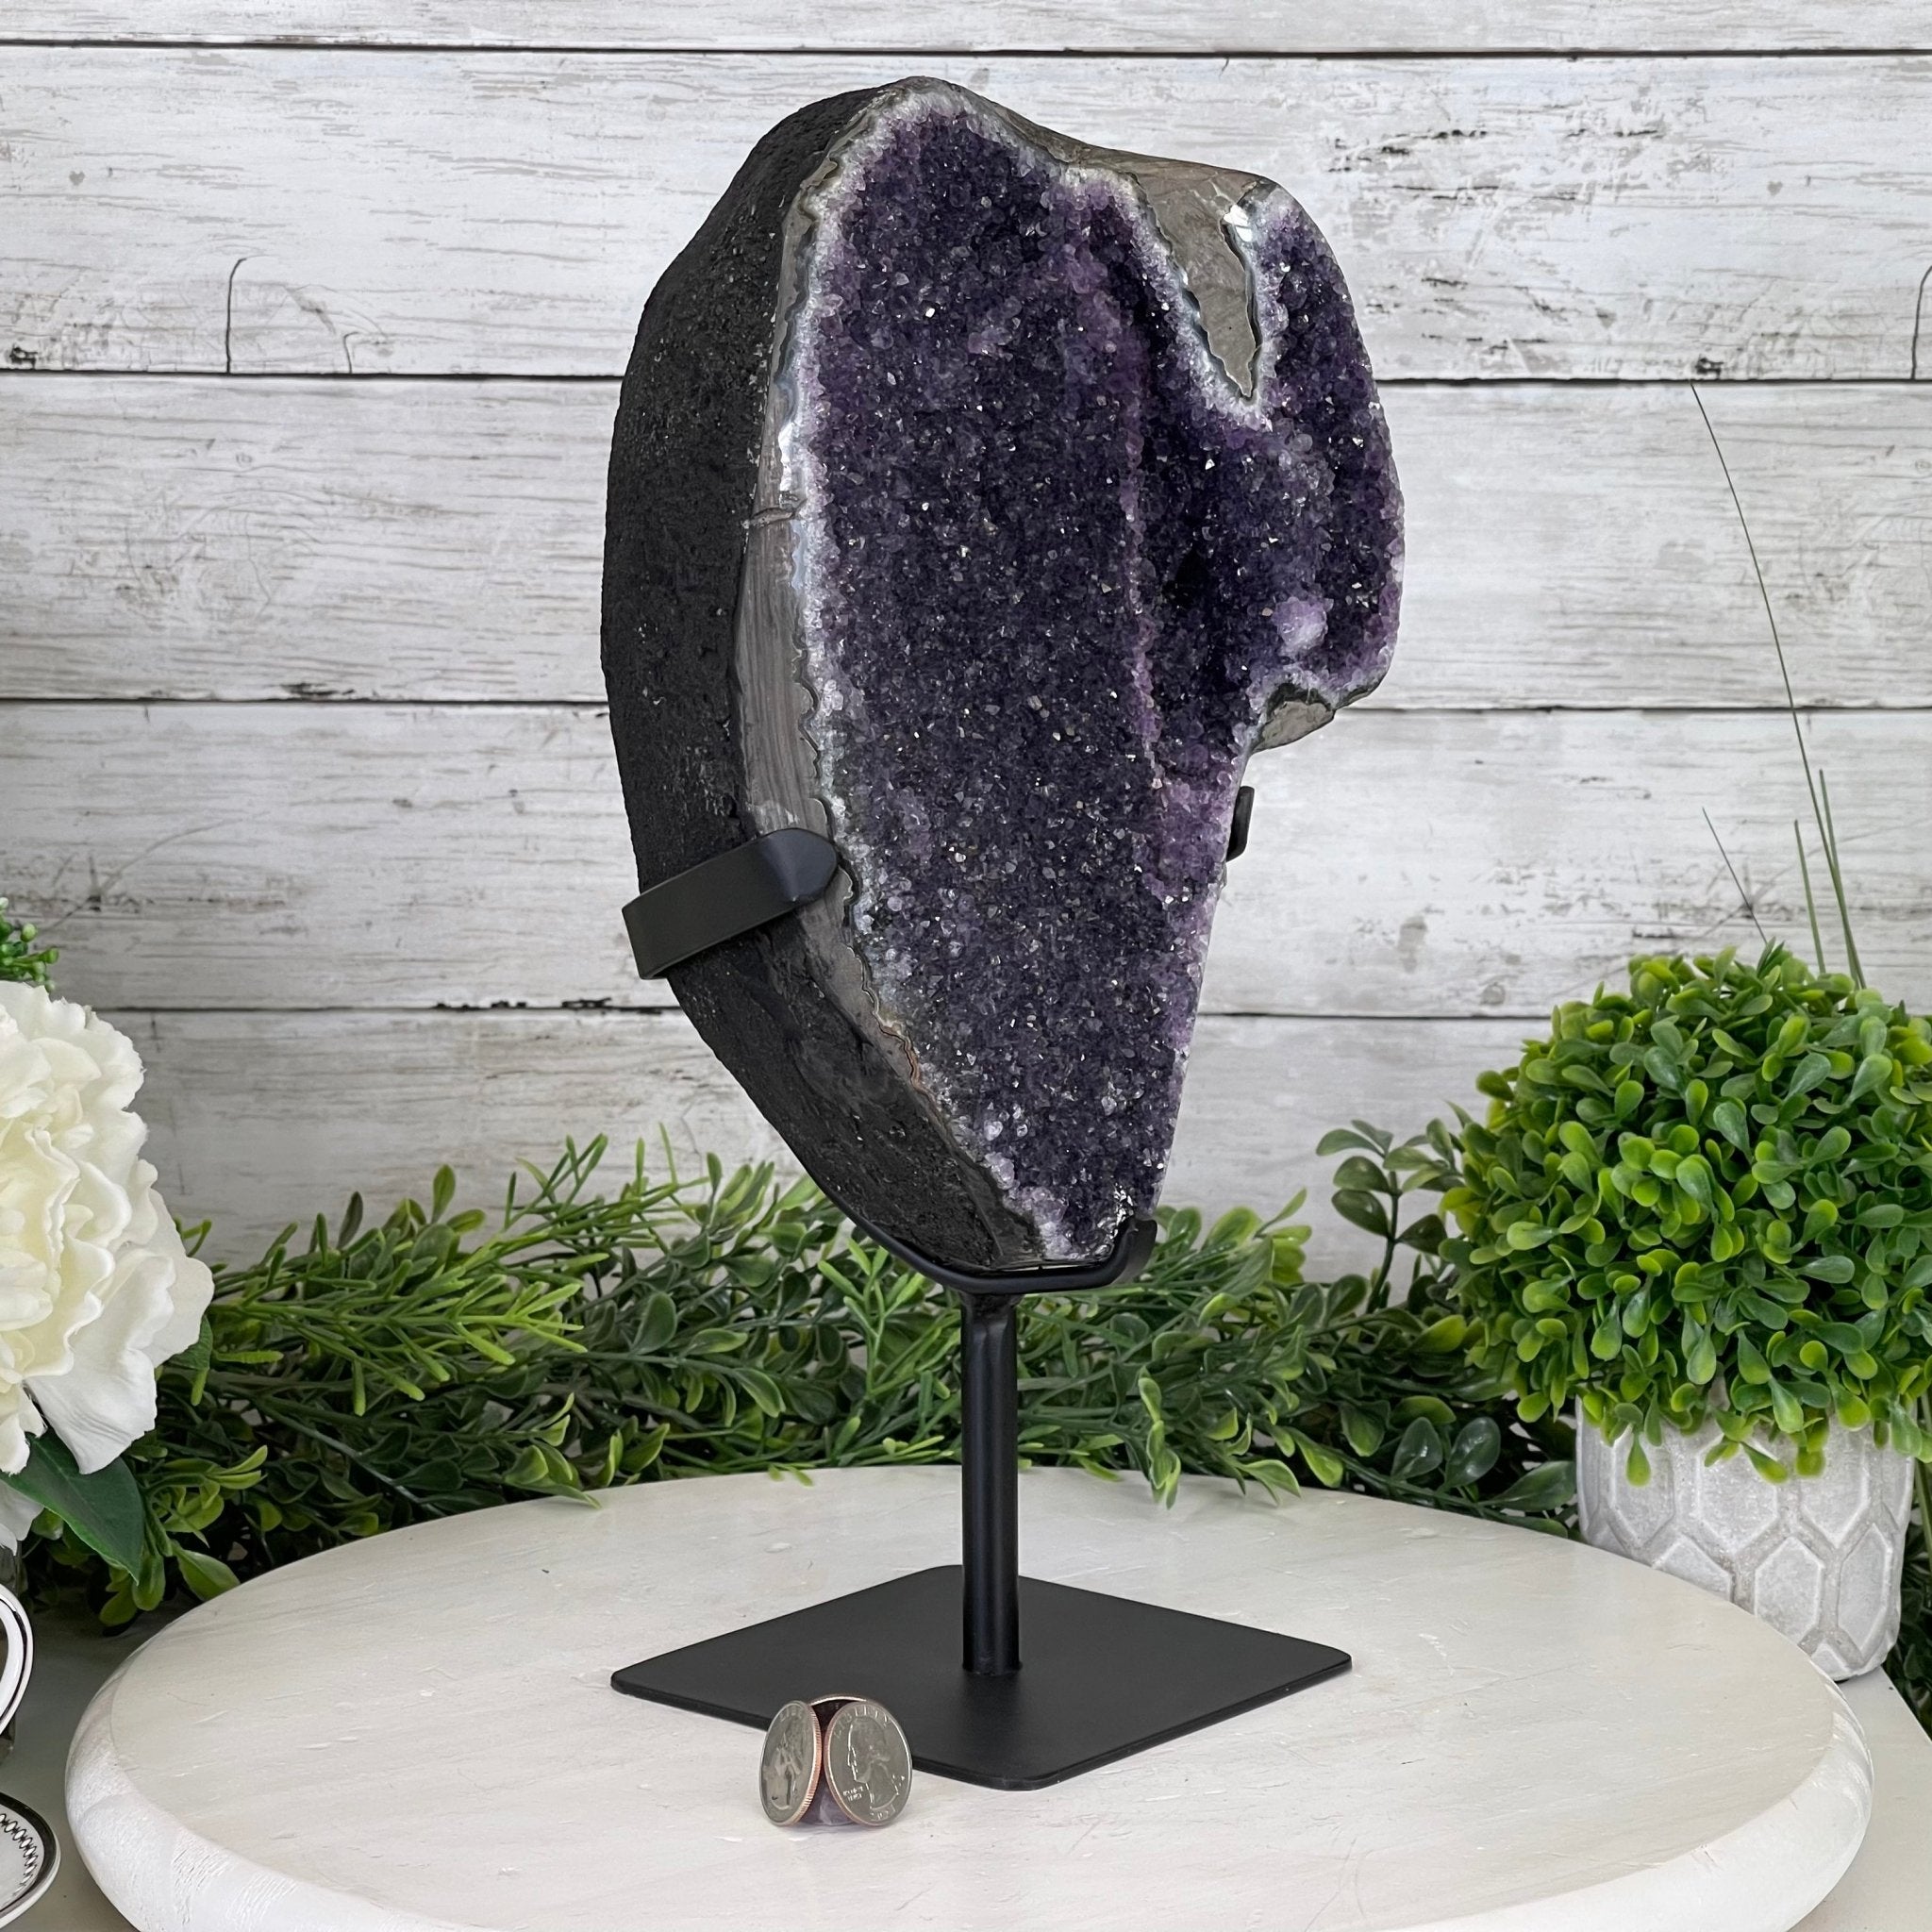 Extra Plus Quality Amethyst Druse Cluster on Metal Stand, 12.7 lbs & 13.4" tall #5491-0043 by Brazil Gems - Brazil GemsBrazil GemsExtra Plus Quality Amethyst Druse Cluster on Metal Stand, 12.7 lbs & 13.4" tall #5491-0043 by Brazil GemsClusters on Fixed Bases5491-0043